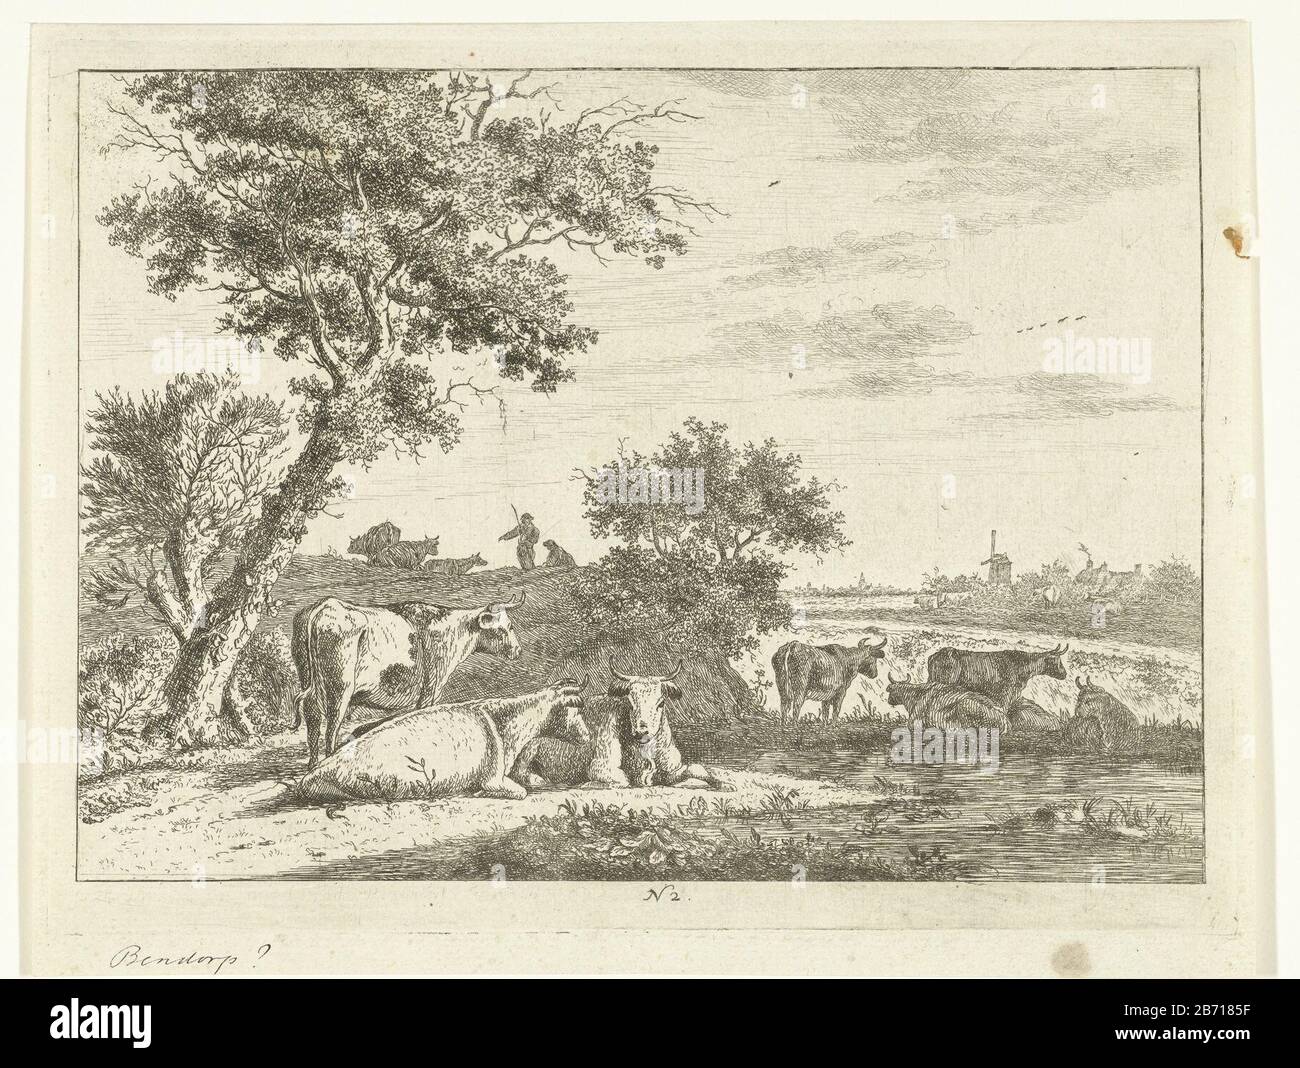 Landschap met boer met kudde koeien Landscape with farmer with cows herd  object type: picture Serial number: 2 / Item number: RP-P-1890-A 16060  Inscriptions / Brands: collector's mark, reverse bottom center, stamped: